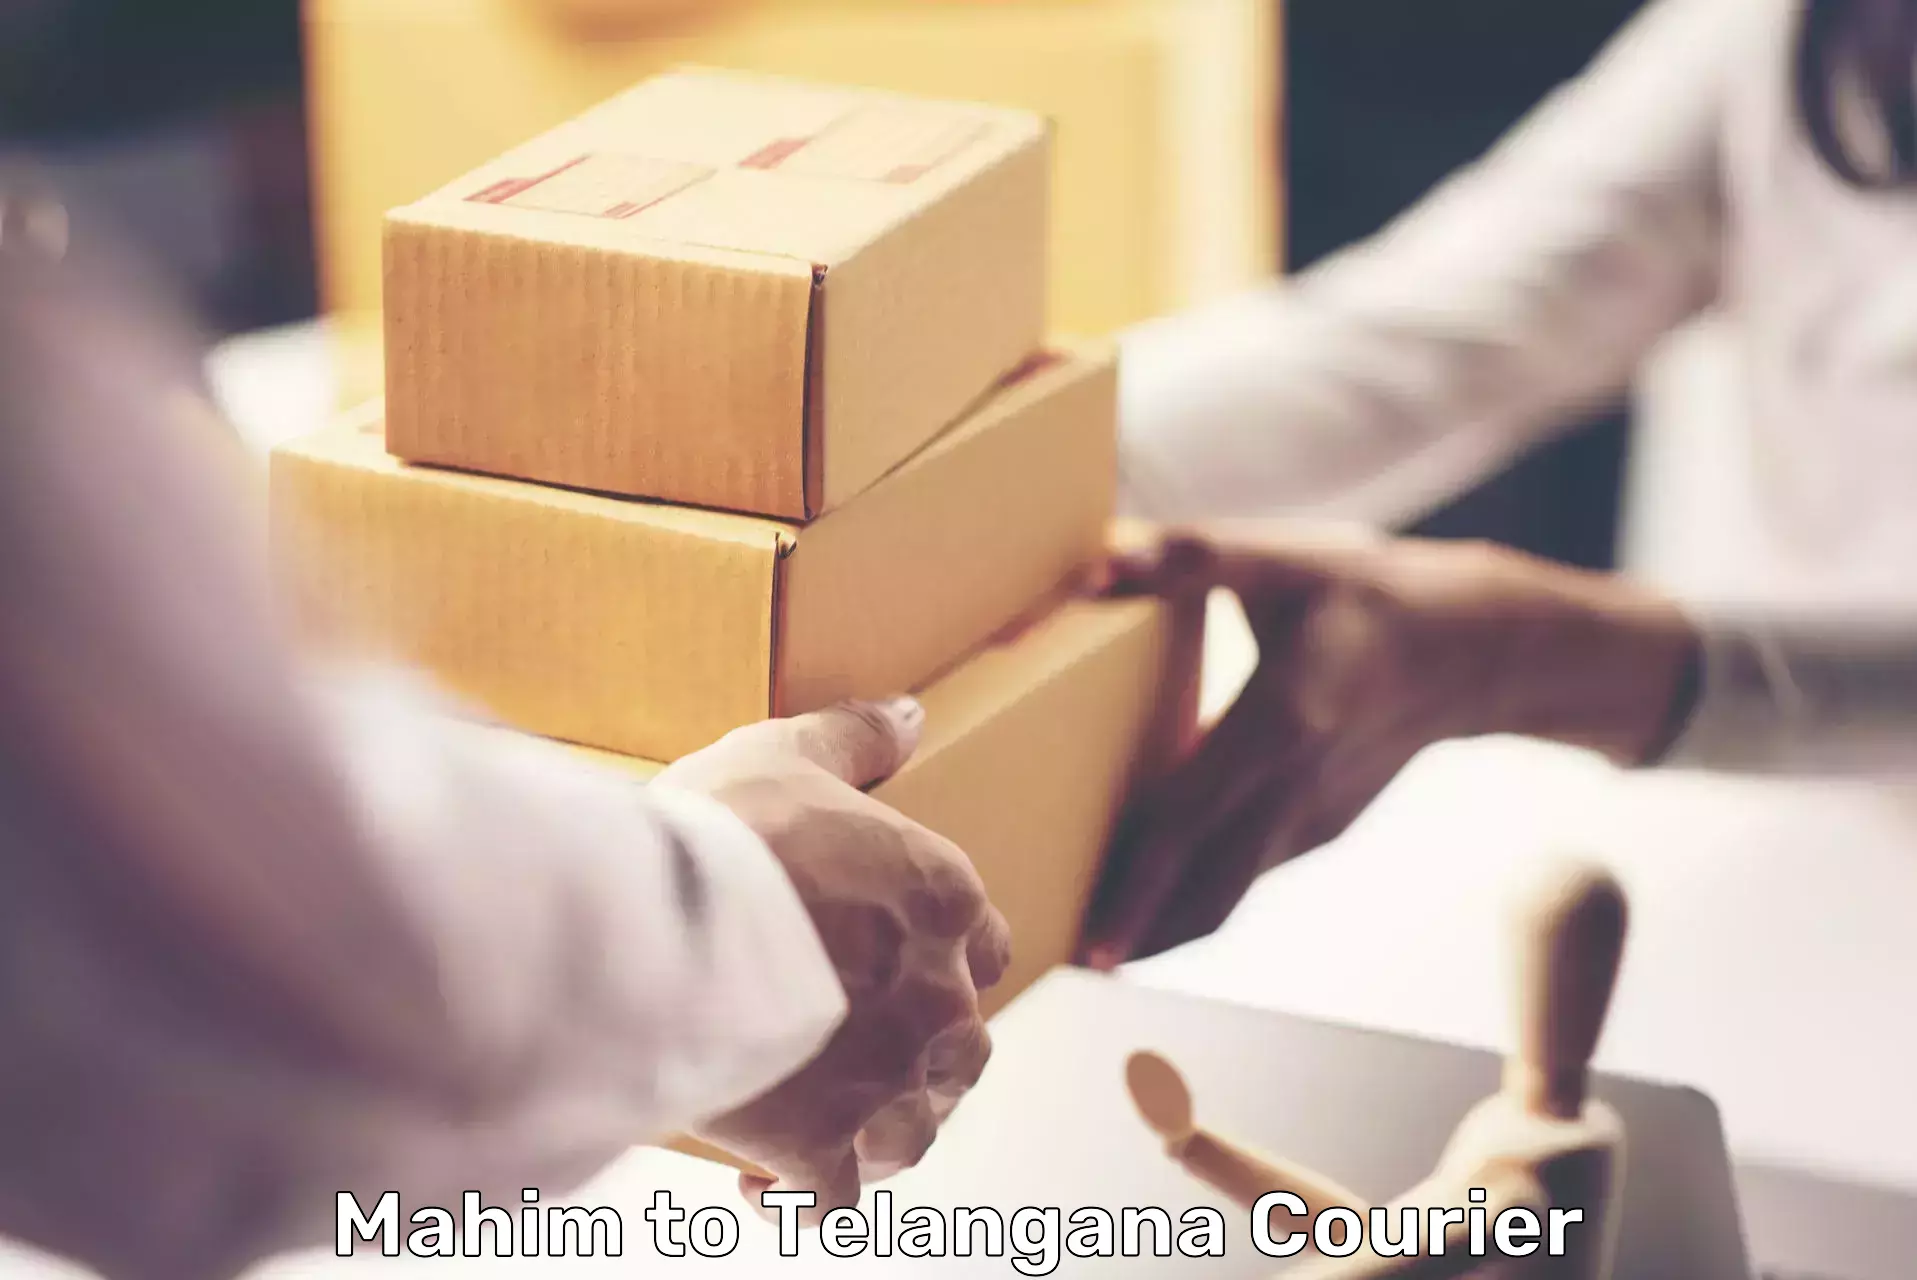 State-of-the-art courier technology in Mahim to Alair